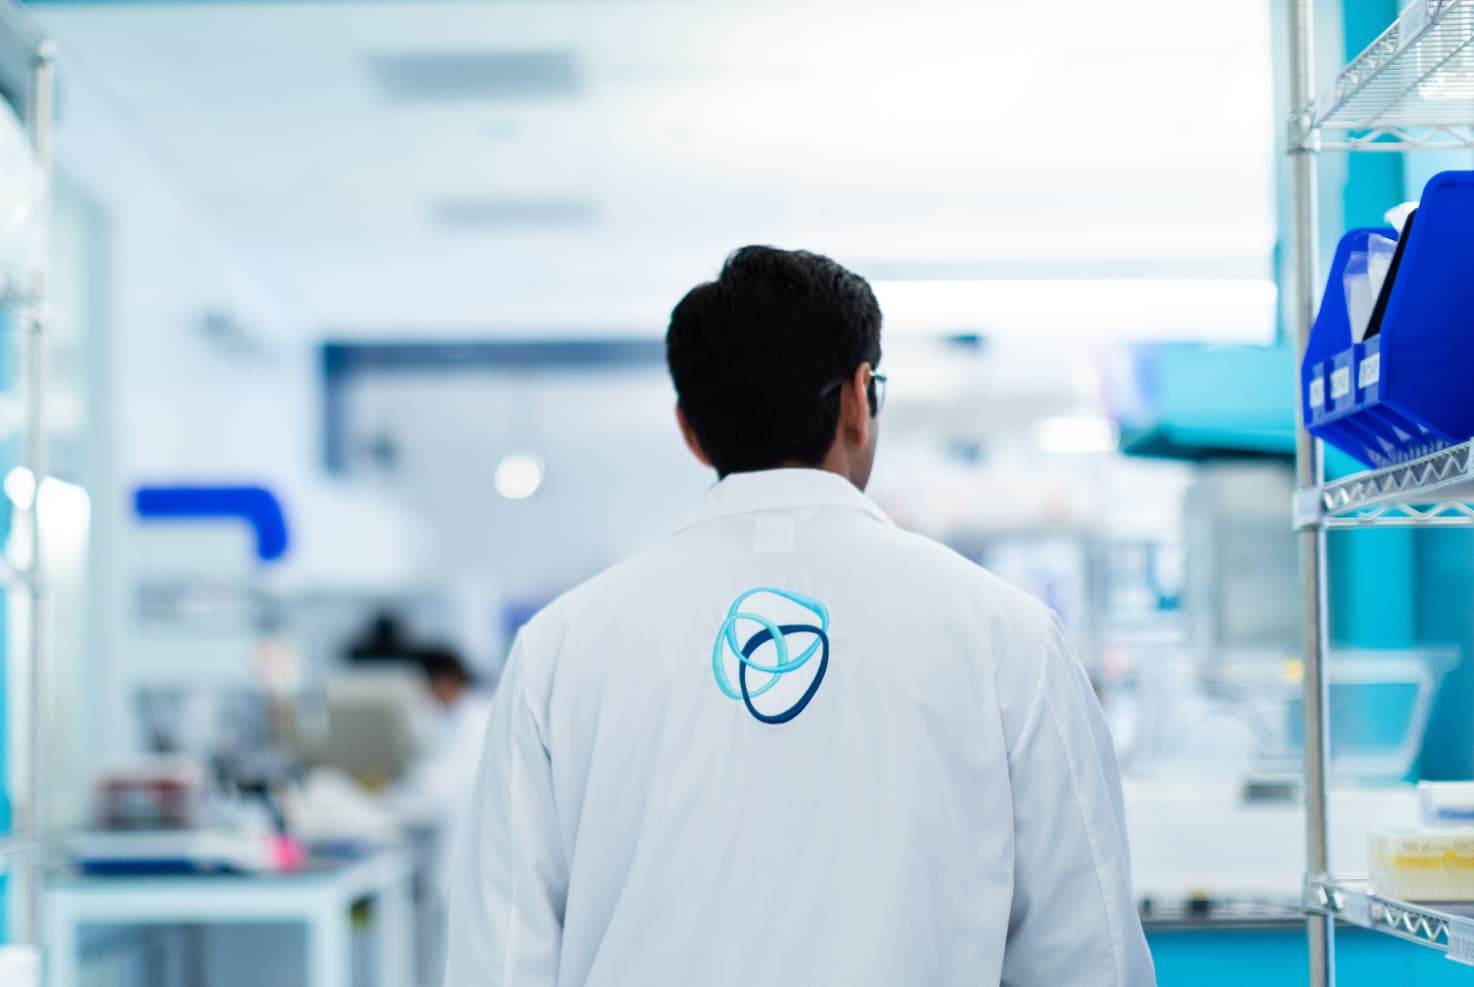 A BlueRock Therapeutics scientist wearing a lab coat with the BlueRock logo visible